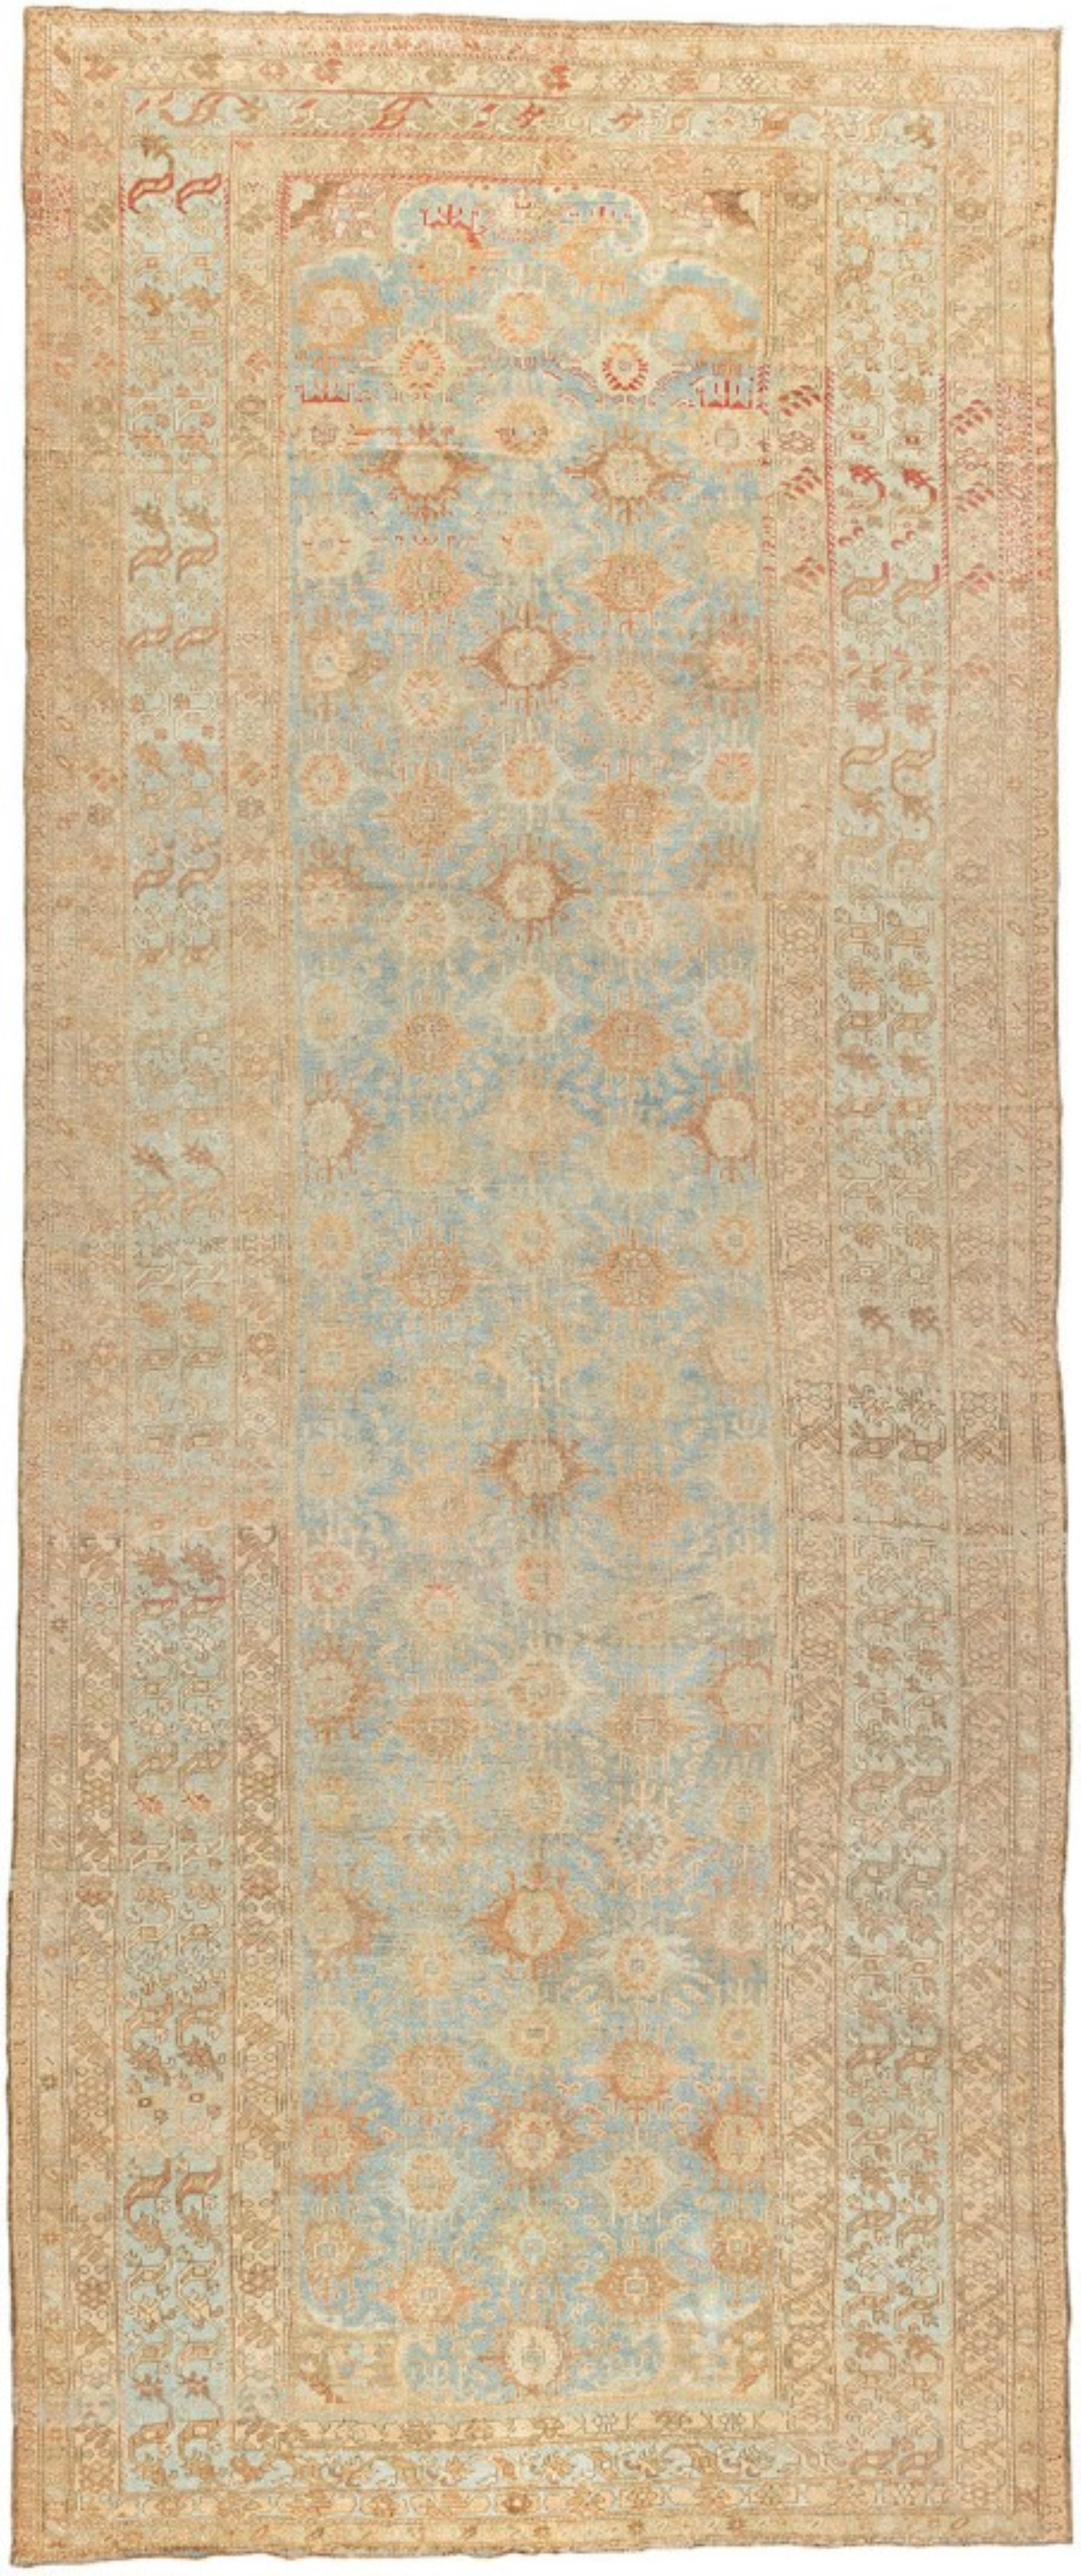 an early 20th Century Antique Malayer corridor size rug in light blue and sand tones

Measures: 8' x 19'4